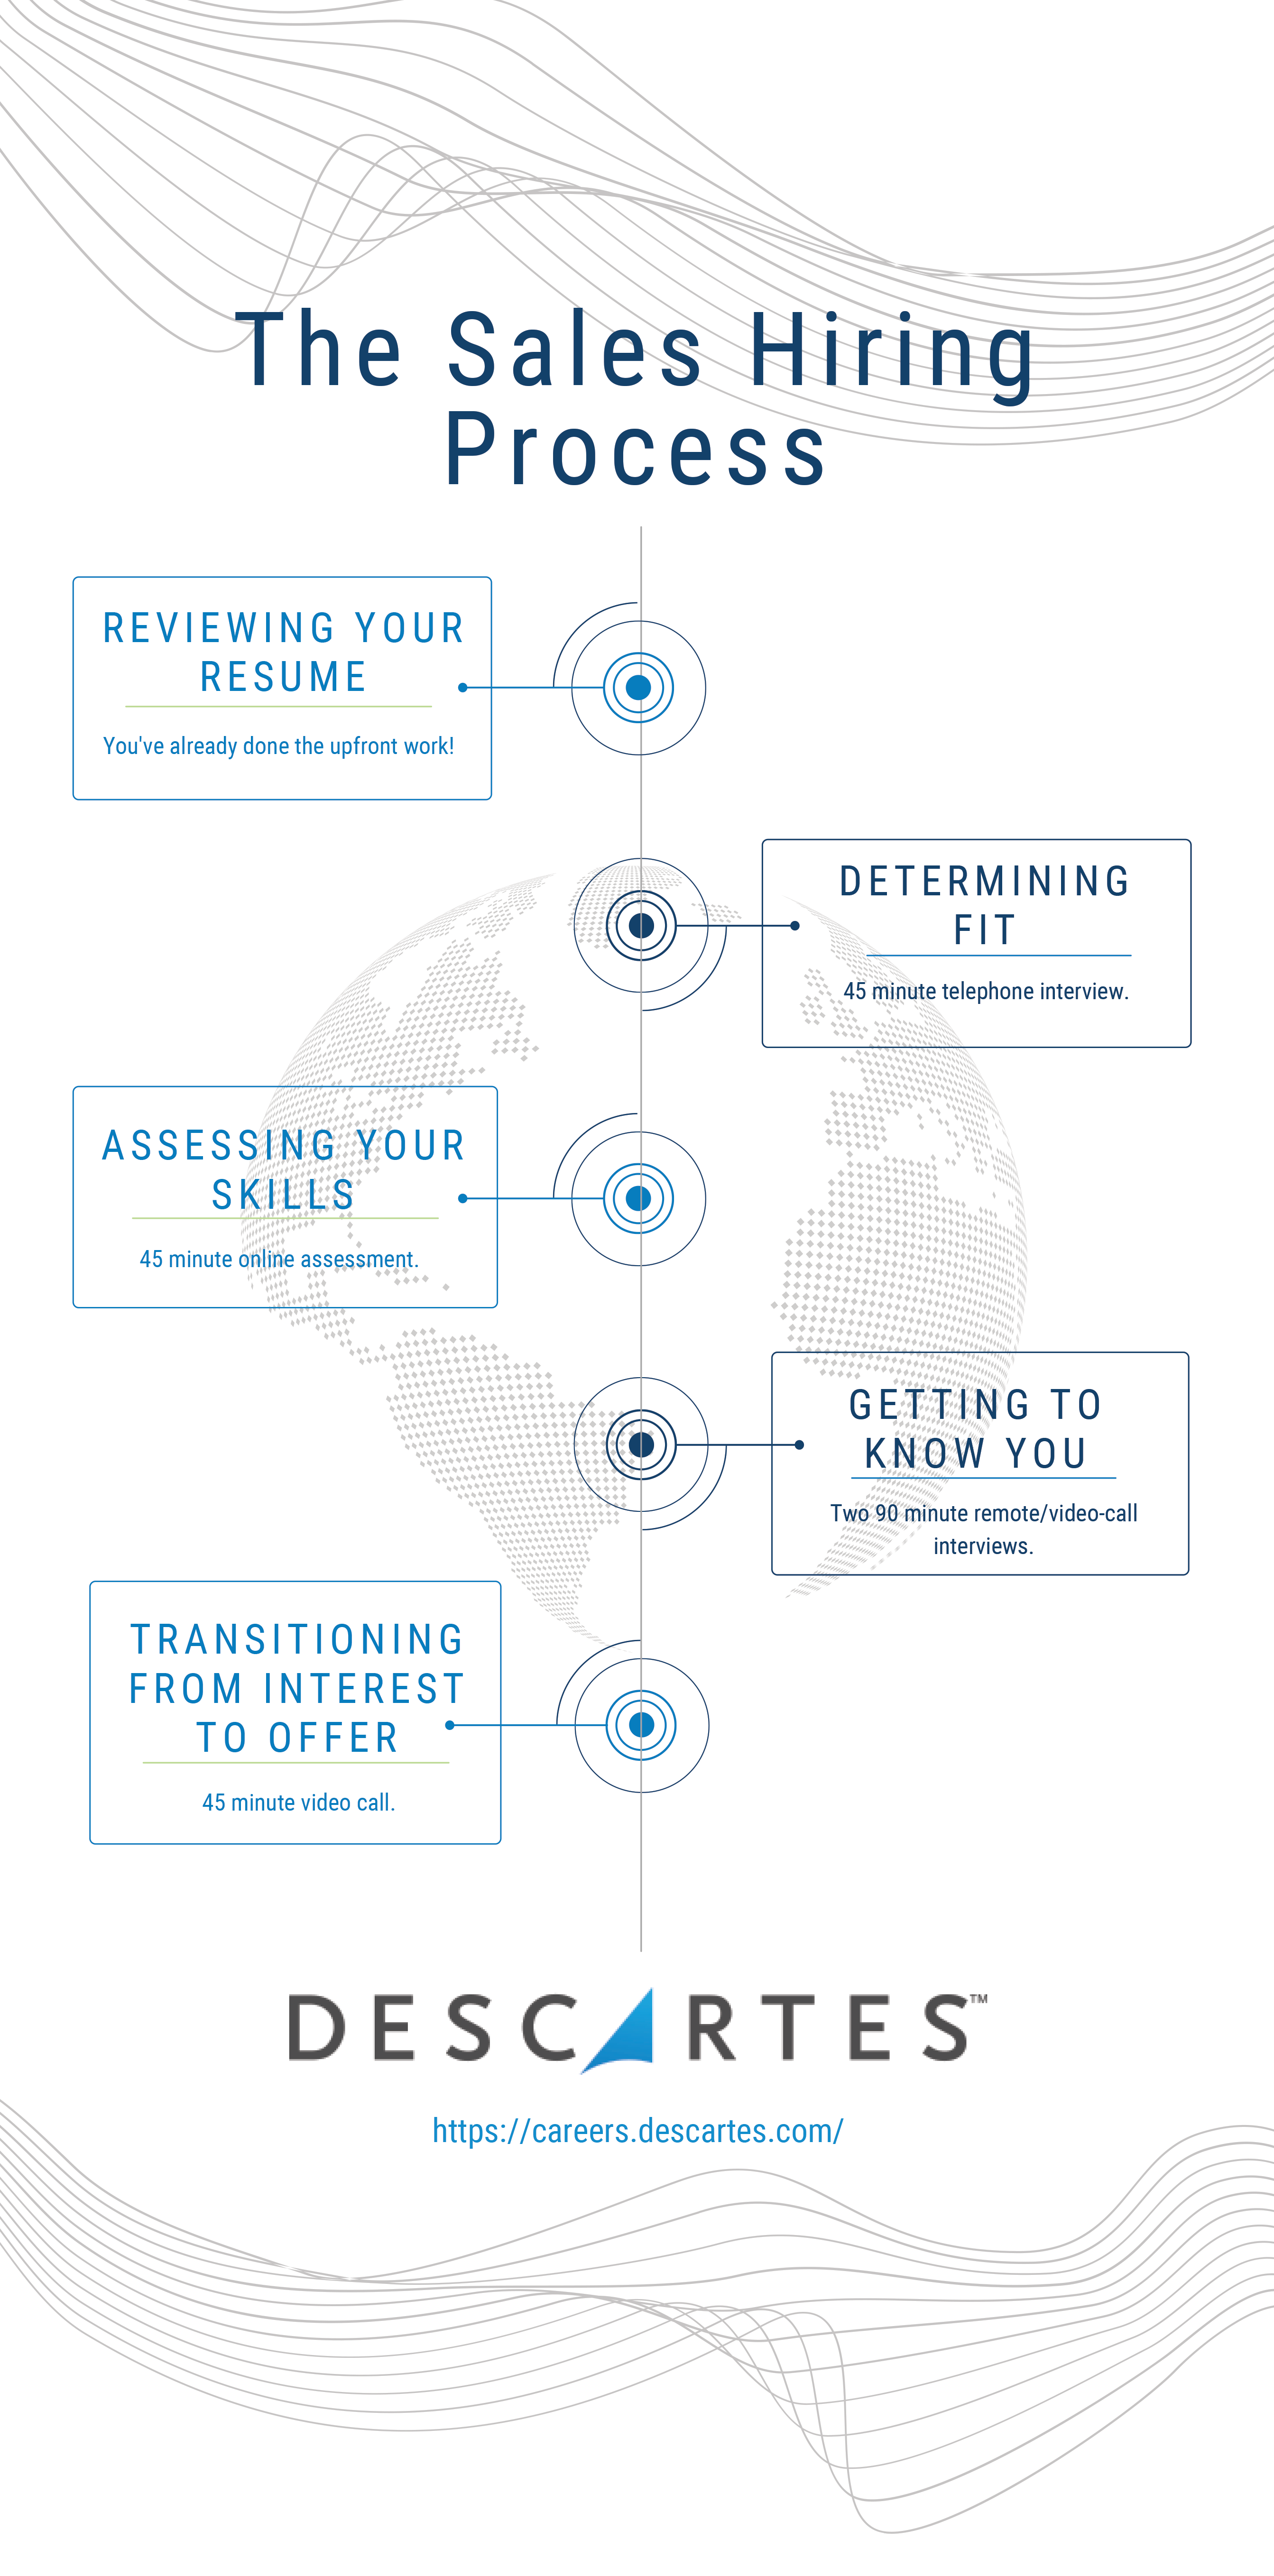 An infographic showcasing the hiring process for sales